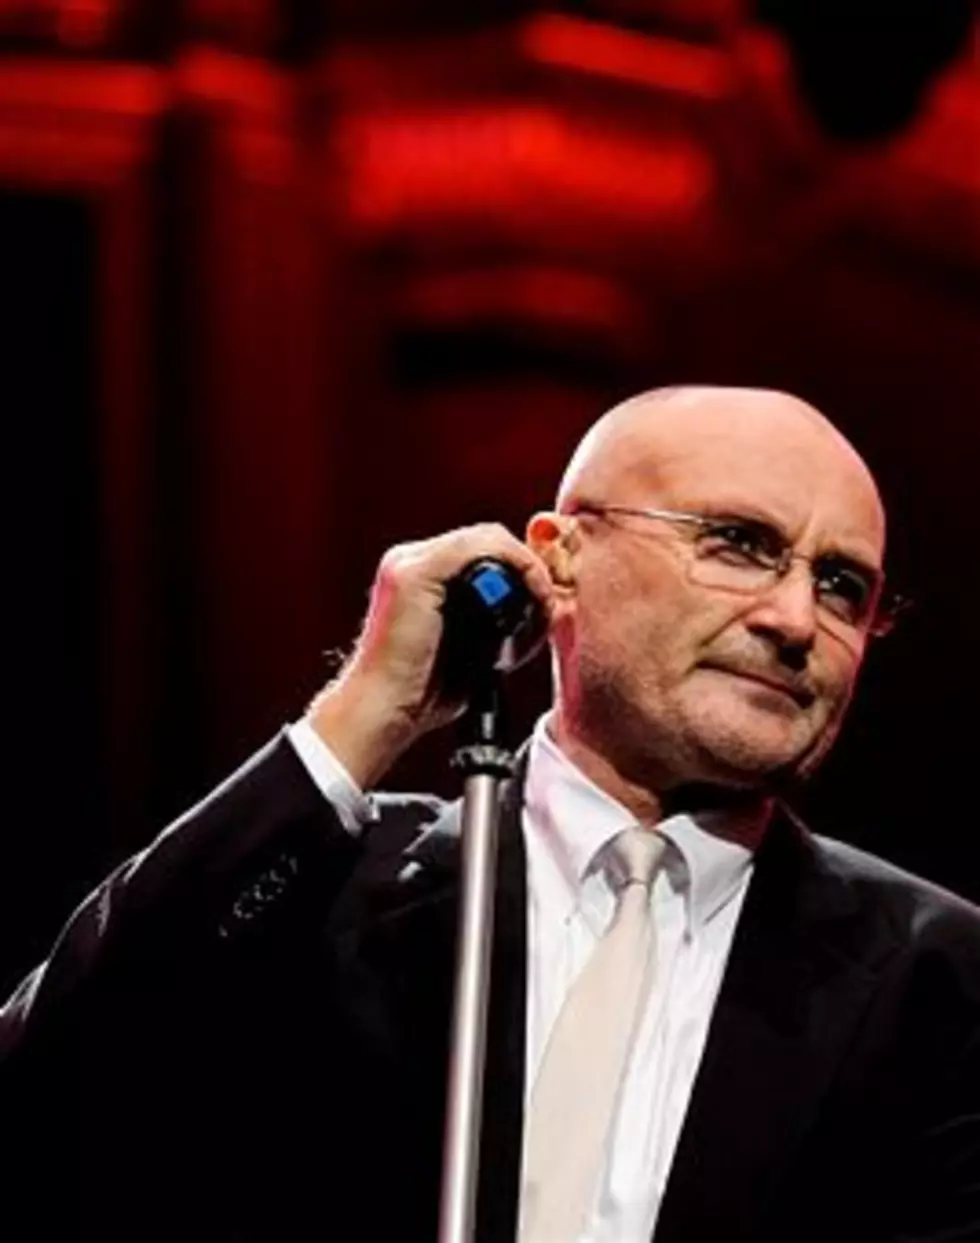 He Don’t Care Anymore! Phil Collins Calls it Quits.